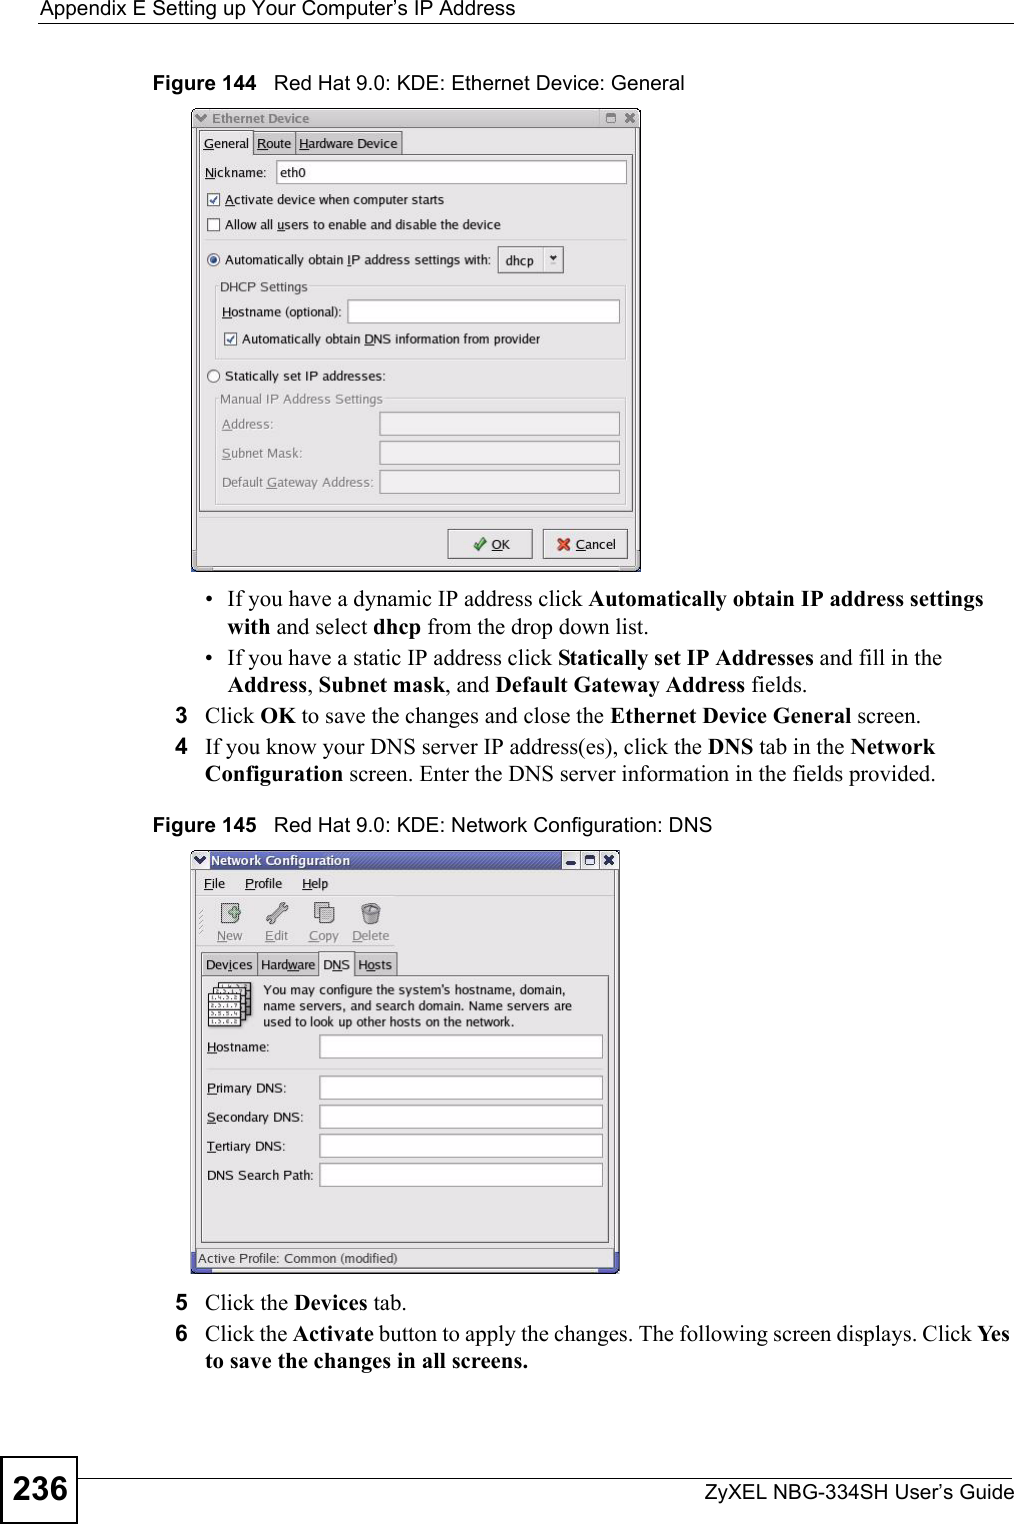 Appendix E Setting up Your Computer’s IP AddressZyXEL NBG-334SH User’s Guide236Figure 144   Red Hat 9.0: KDE: Ethernet Device: General  • If you have a dynamic IP address click Automatically obtain IP address settings with and select dhcp from the drop down list. • If you have a static IP address click Statically set IP Addresses and fill in the  Address, Subnet mask, and Default Gateway Address fields. 3Click OK to save the changes and close the Ethernet Device General screen. 4If you know your DNS server IP address(es), click the DNS tab in the Network Configuration screen. Enter the DNS server information in the fields provided. Figure 145   Red Hat 9.0: KDE: Network Configuration: DNS 5Click the Devices tab. 6Click the Activate button to apply the changes. The following screen displays. Click Yes to save the changes in all screens.